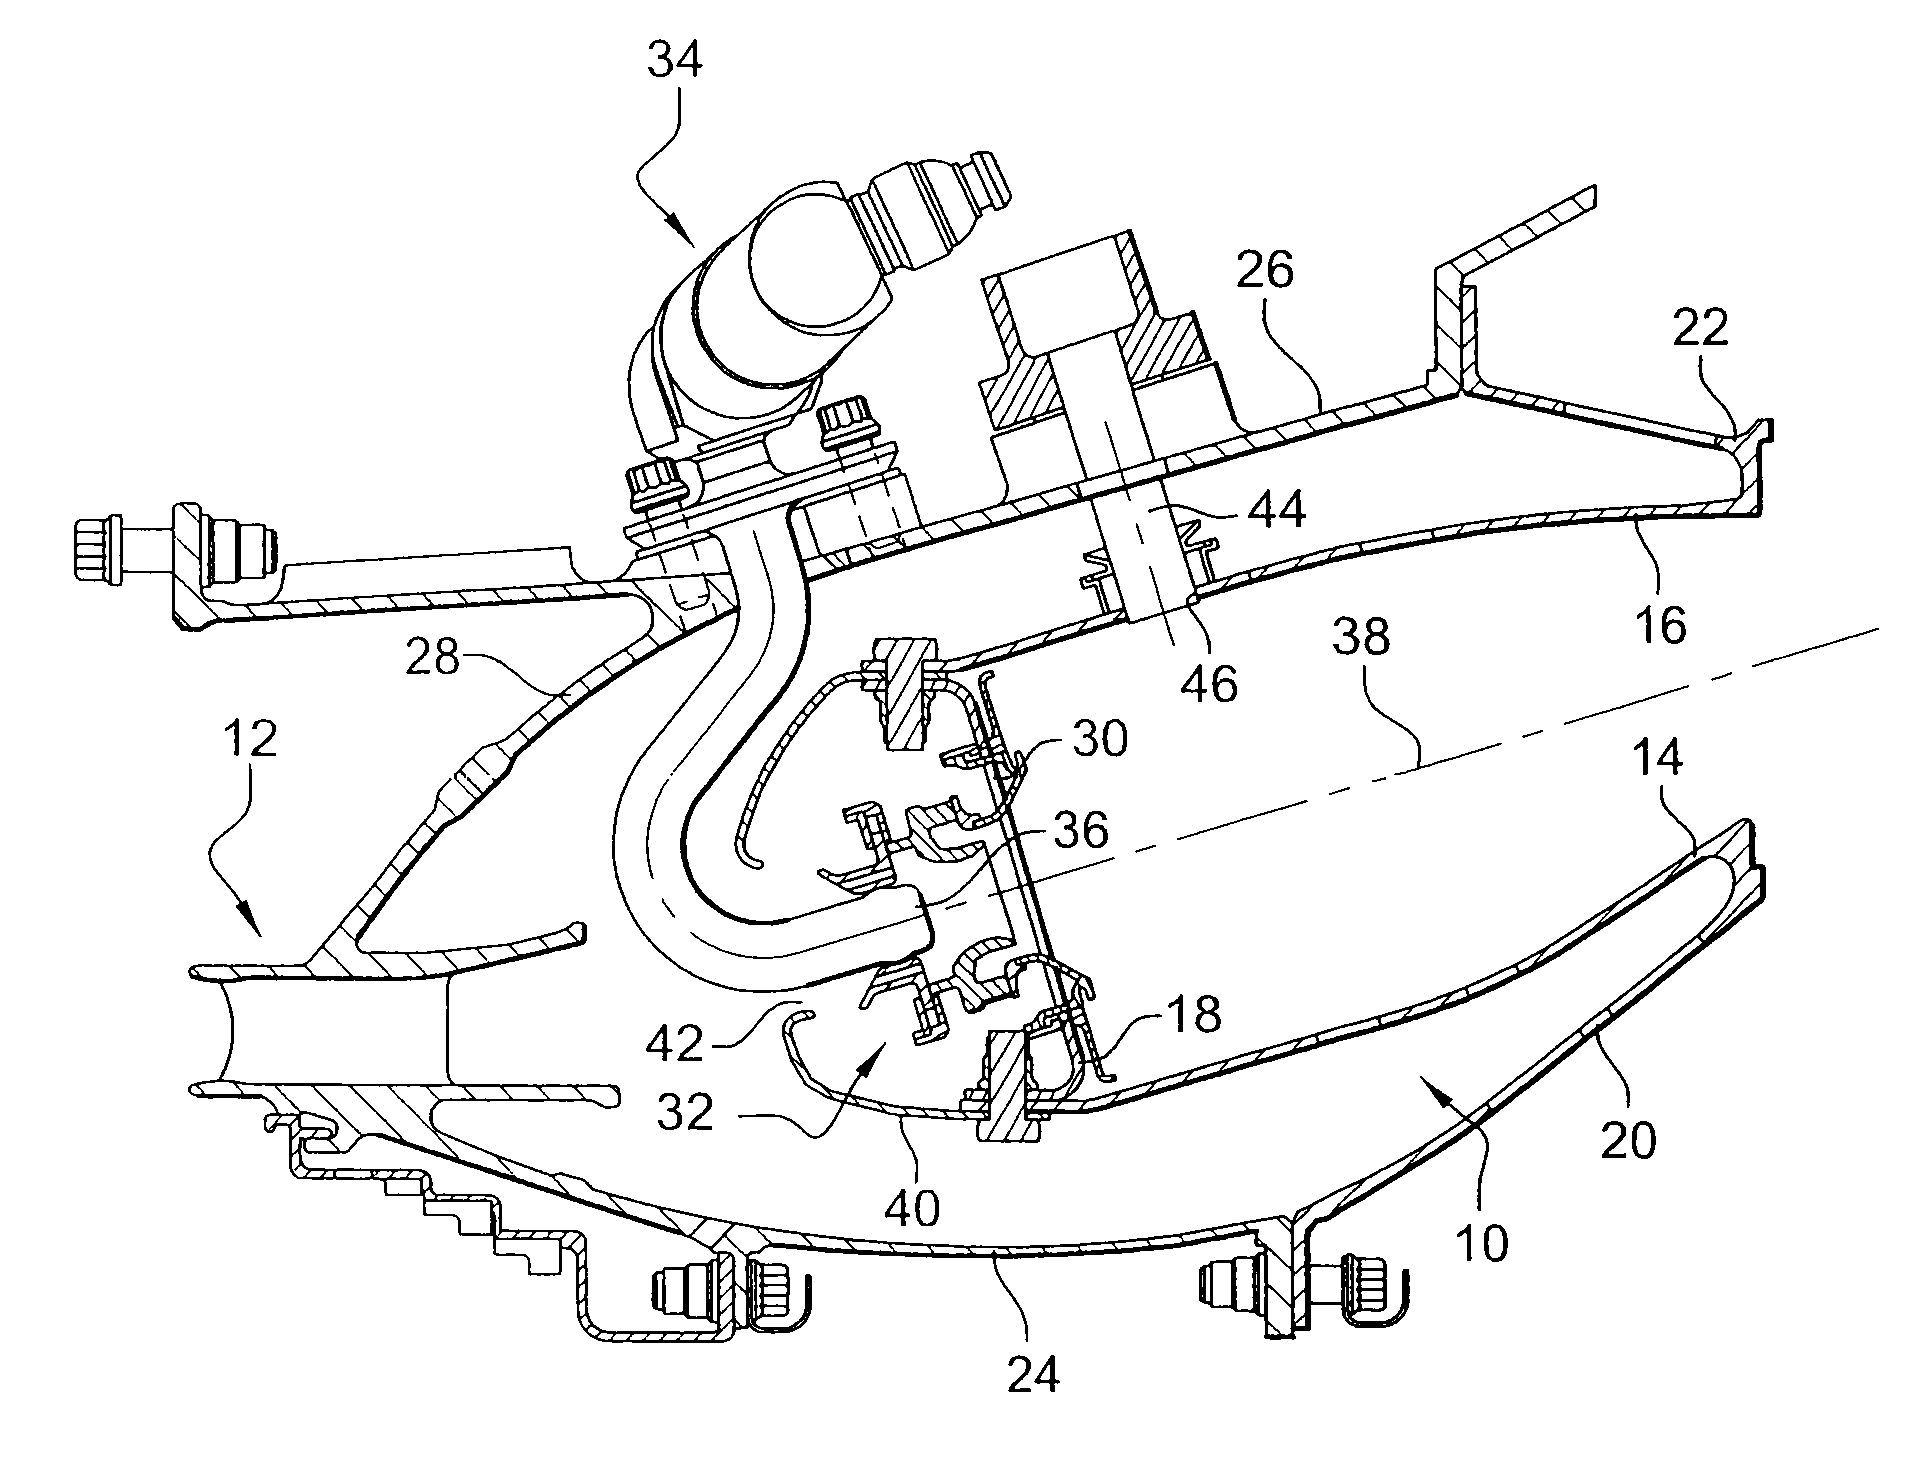 Fuel injection systems in a turbomachine combustion chamber